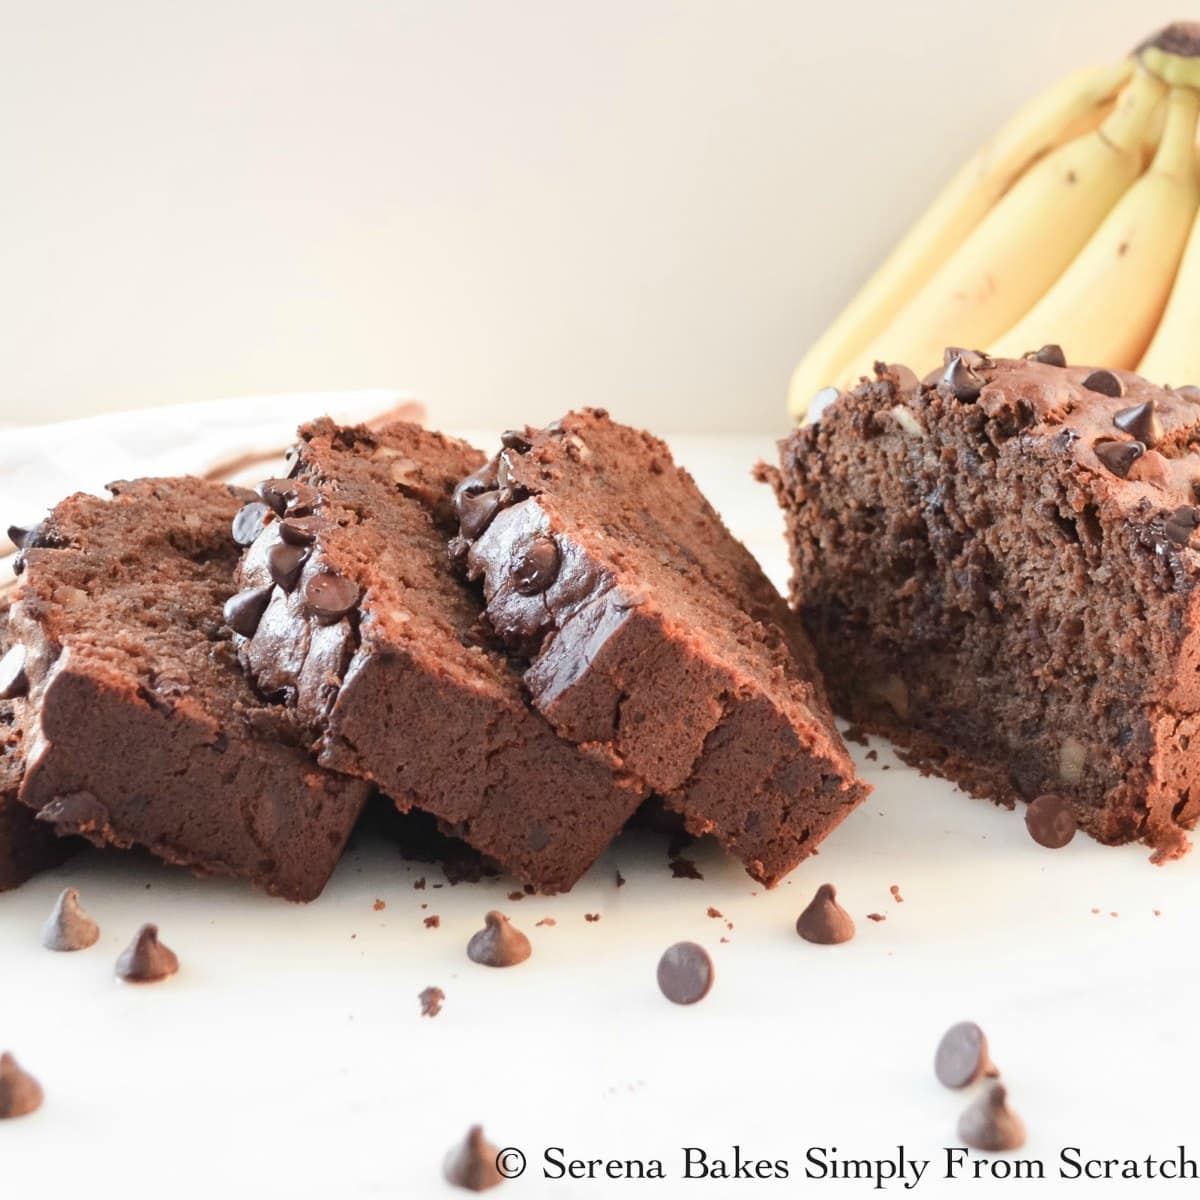 Double Chocolate Banana Bread is moist and chocolaty with plenty of chocolate chips from Serena Bakes Simply From Scratch.